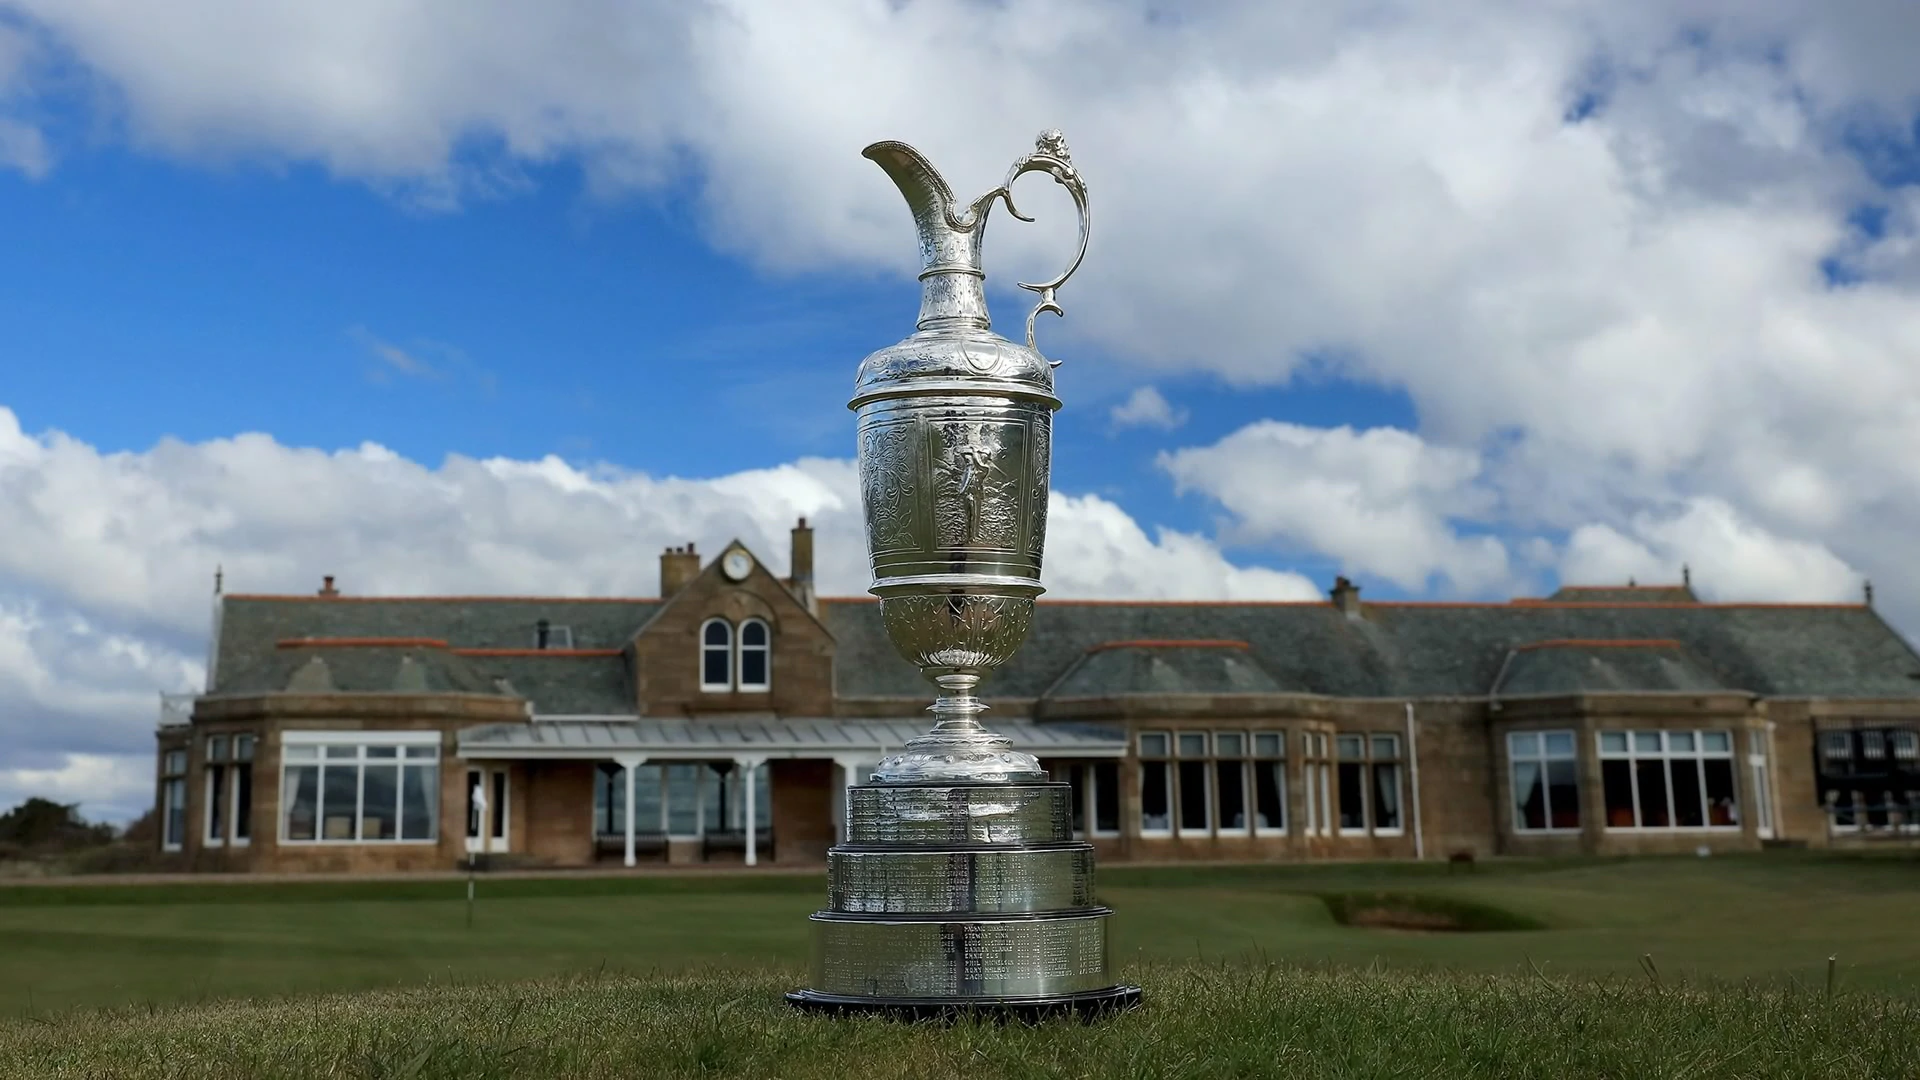 Royal Liverpool, Royal Troon announced as future Open Championship sites